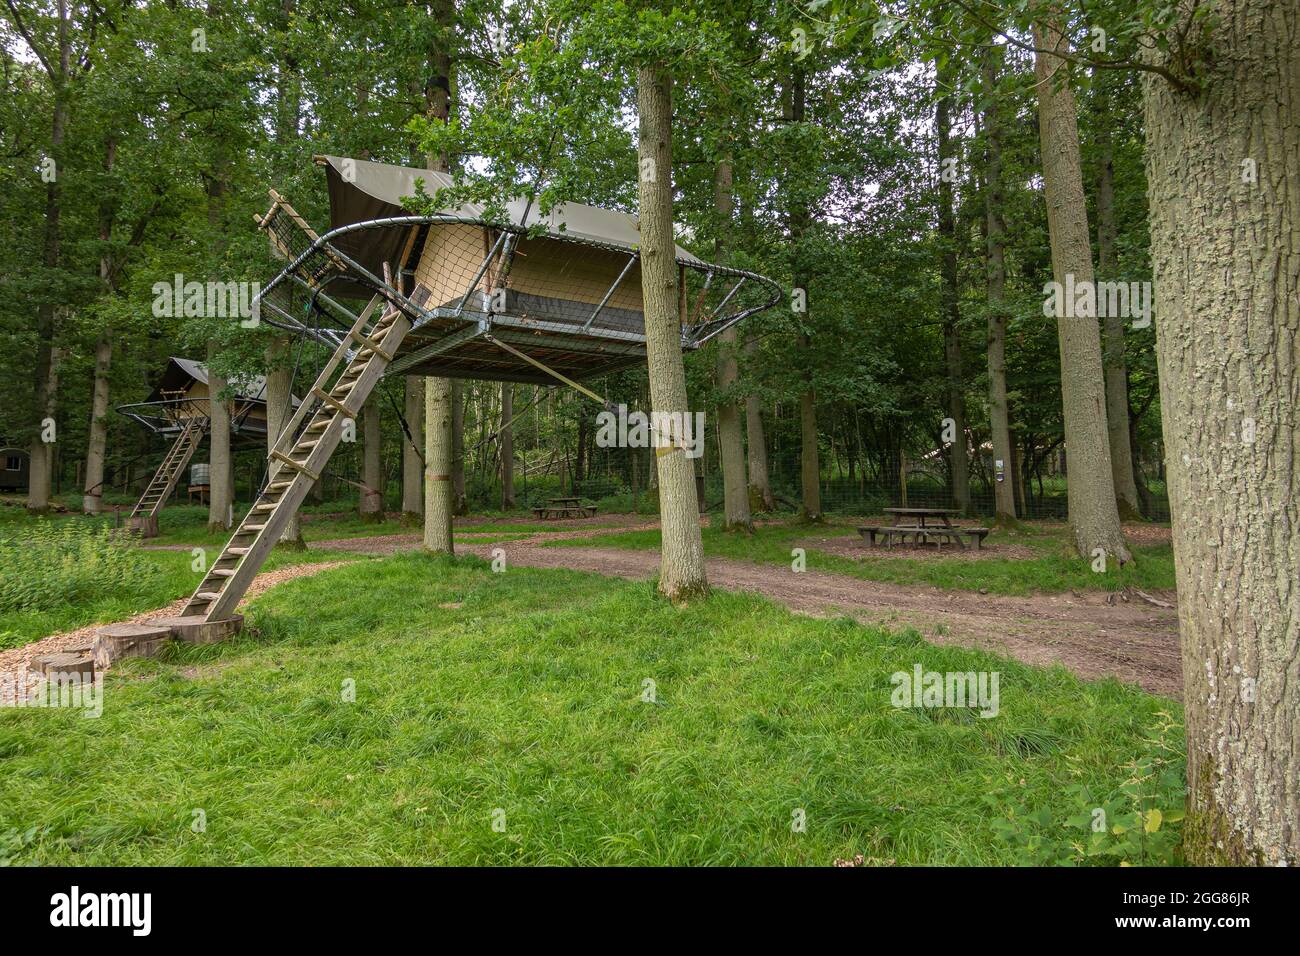 Han-sur-Lesse, Wallonia, Belgium - August 9, 2021: Wildpark. Tree tent for rent in open forest at the domain. The dwelling hangs in between trees. A l Stock Photo